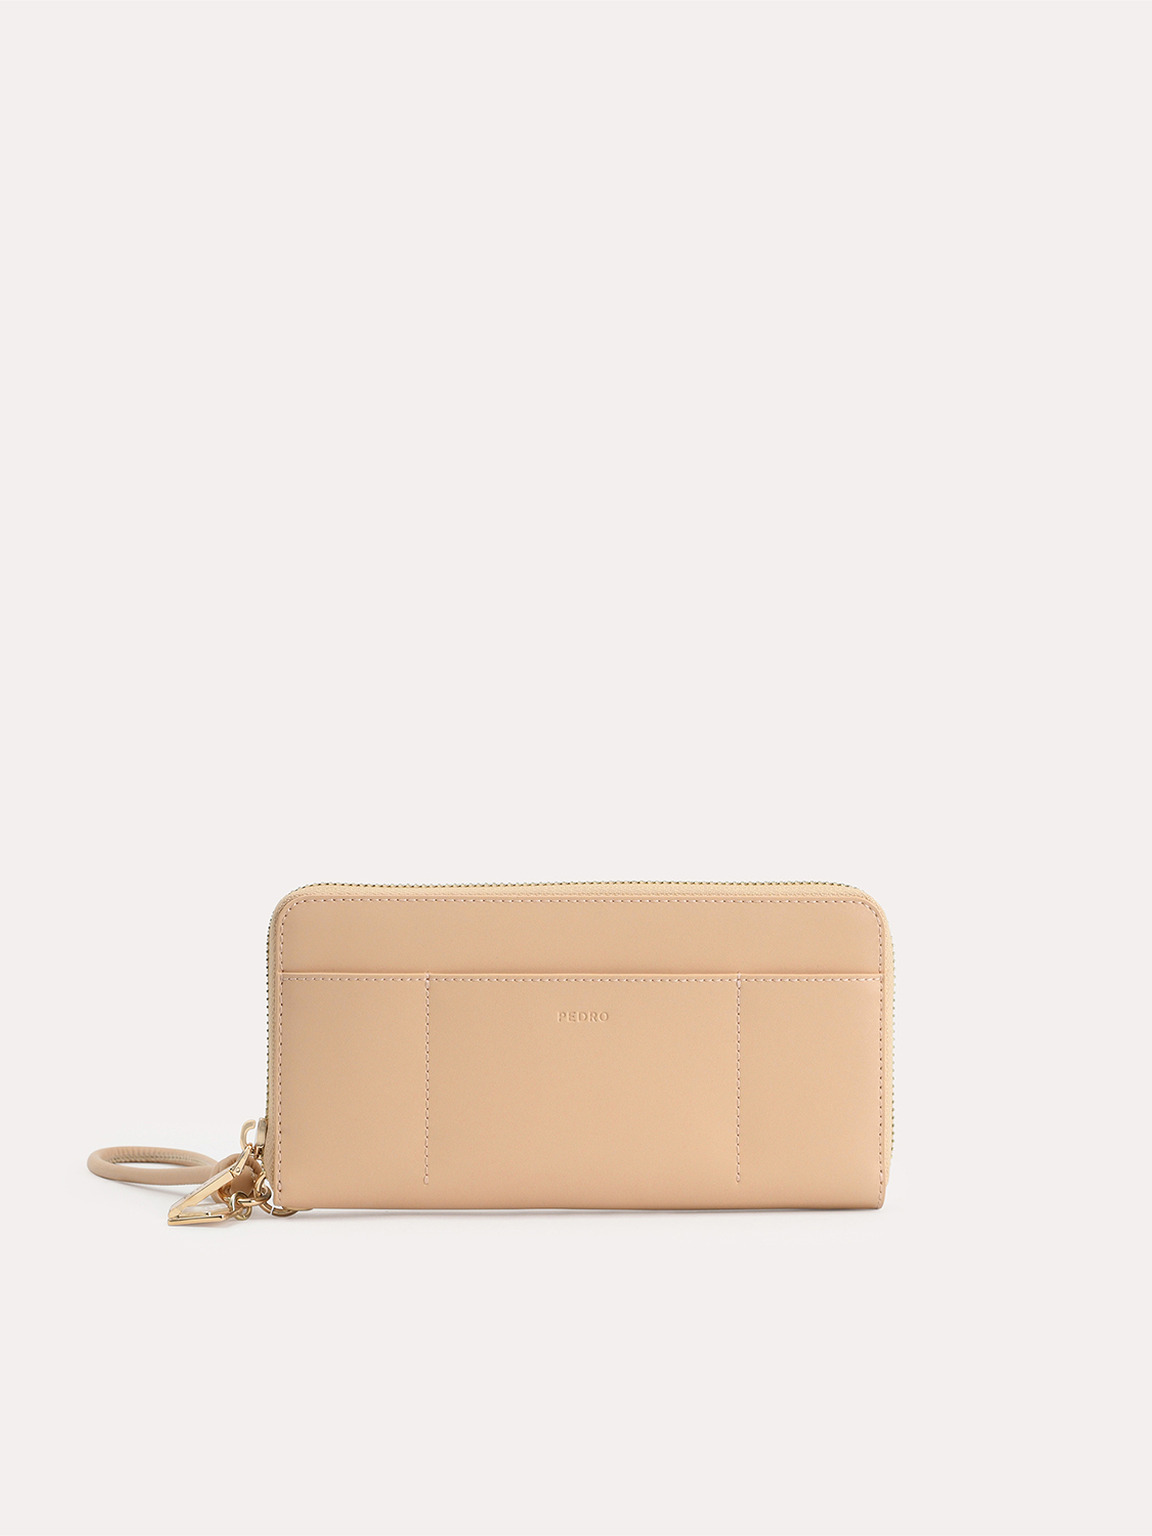 Long Leather Zip Wallet, Sand